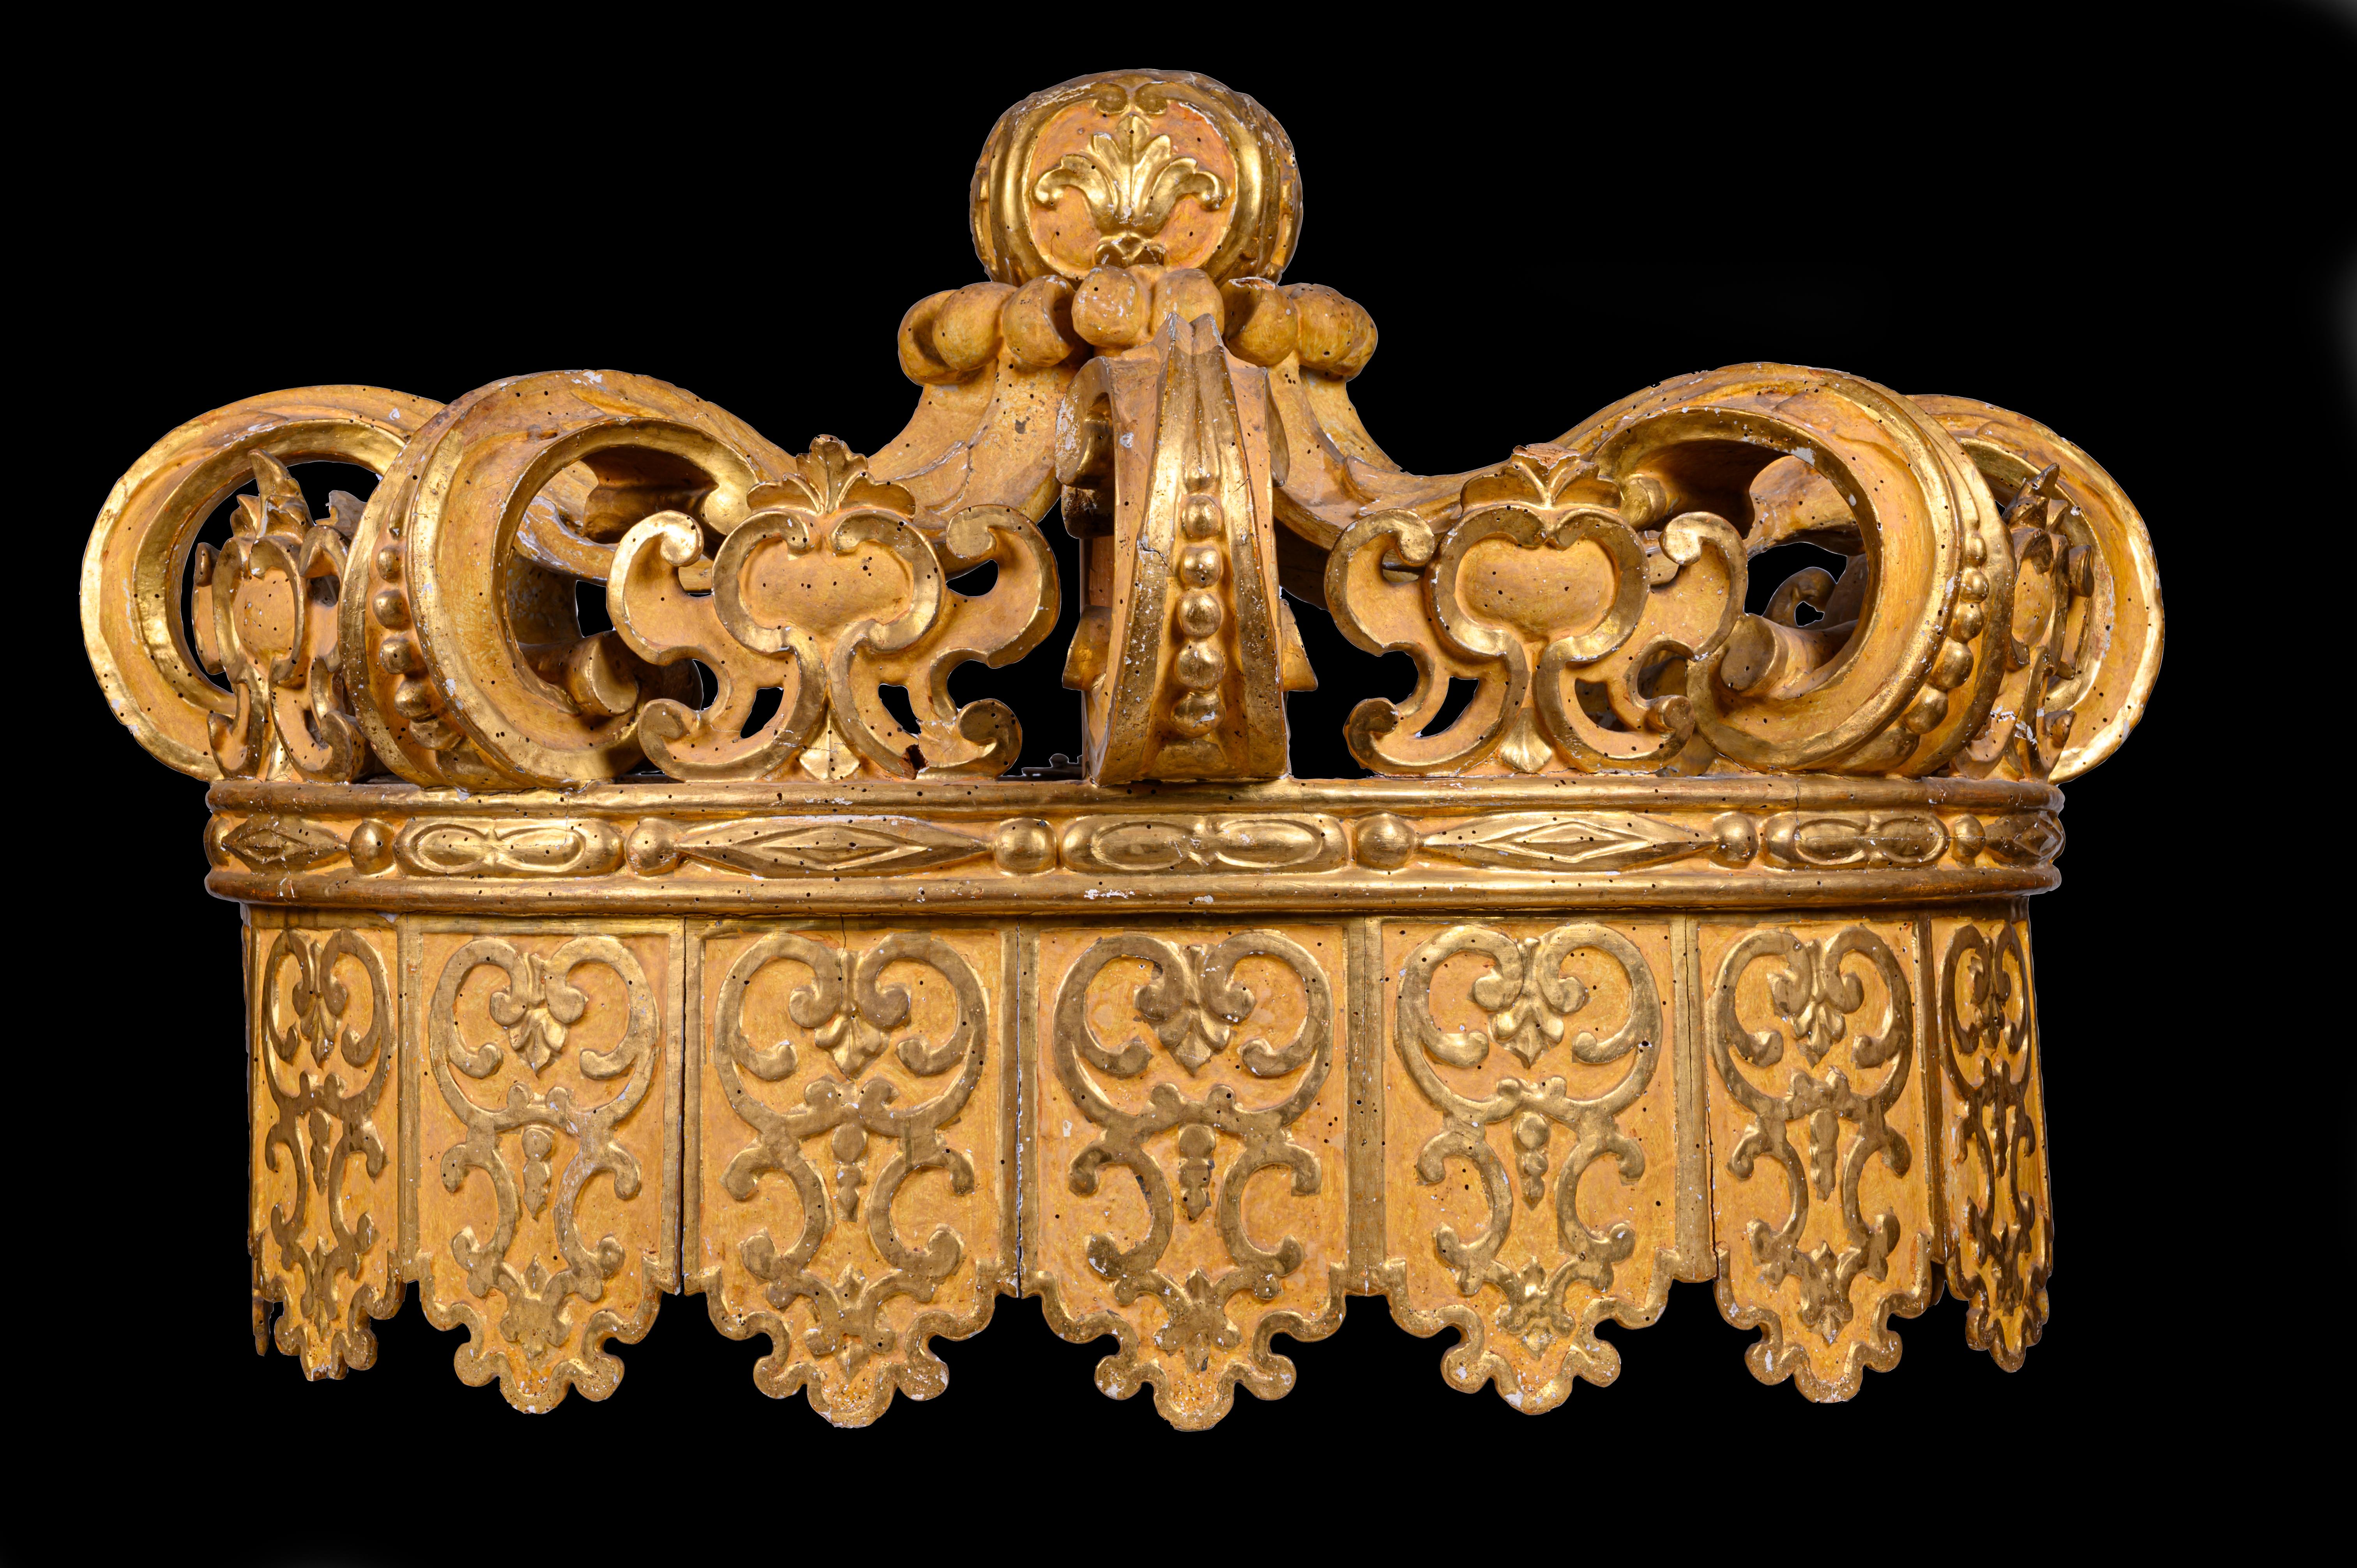 Hand-Carved Italian Early 18th Century Louis XIV Giltwood Crown-Shaped Bed Canape